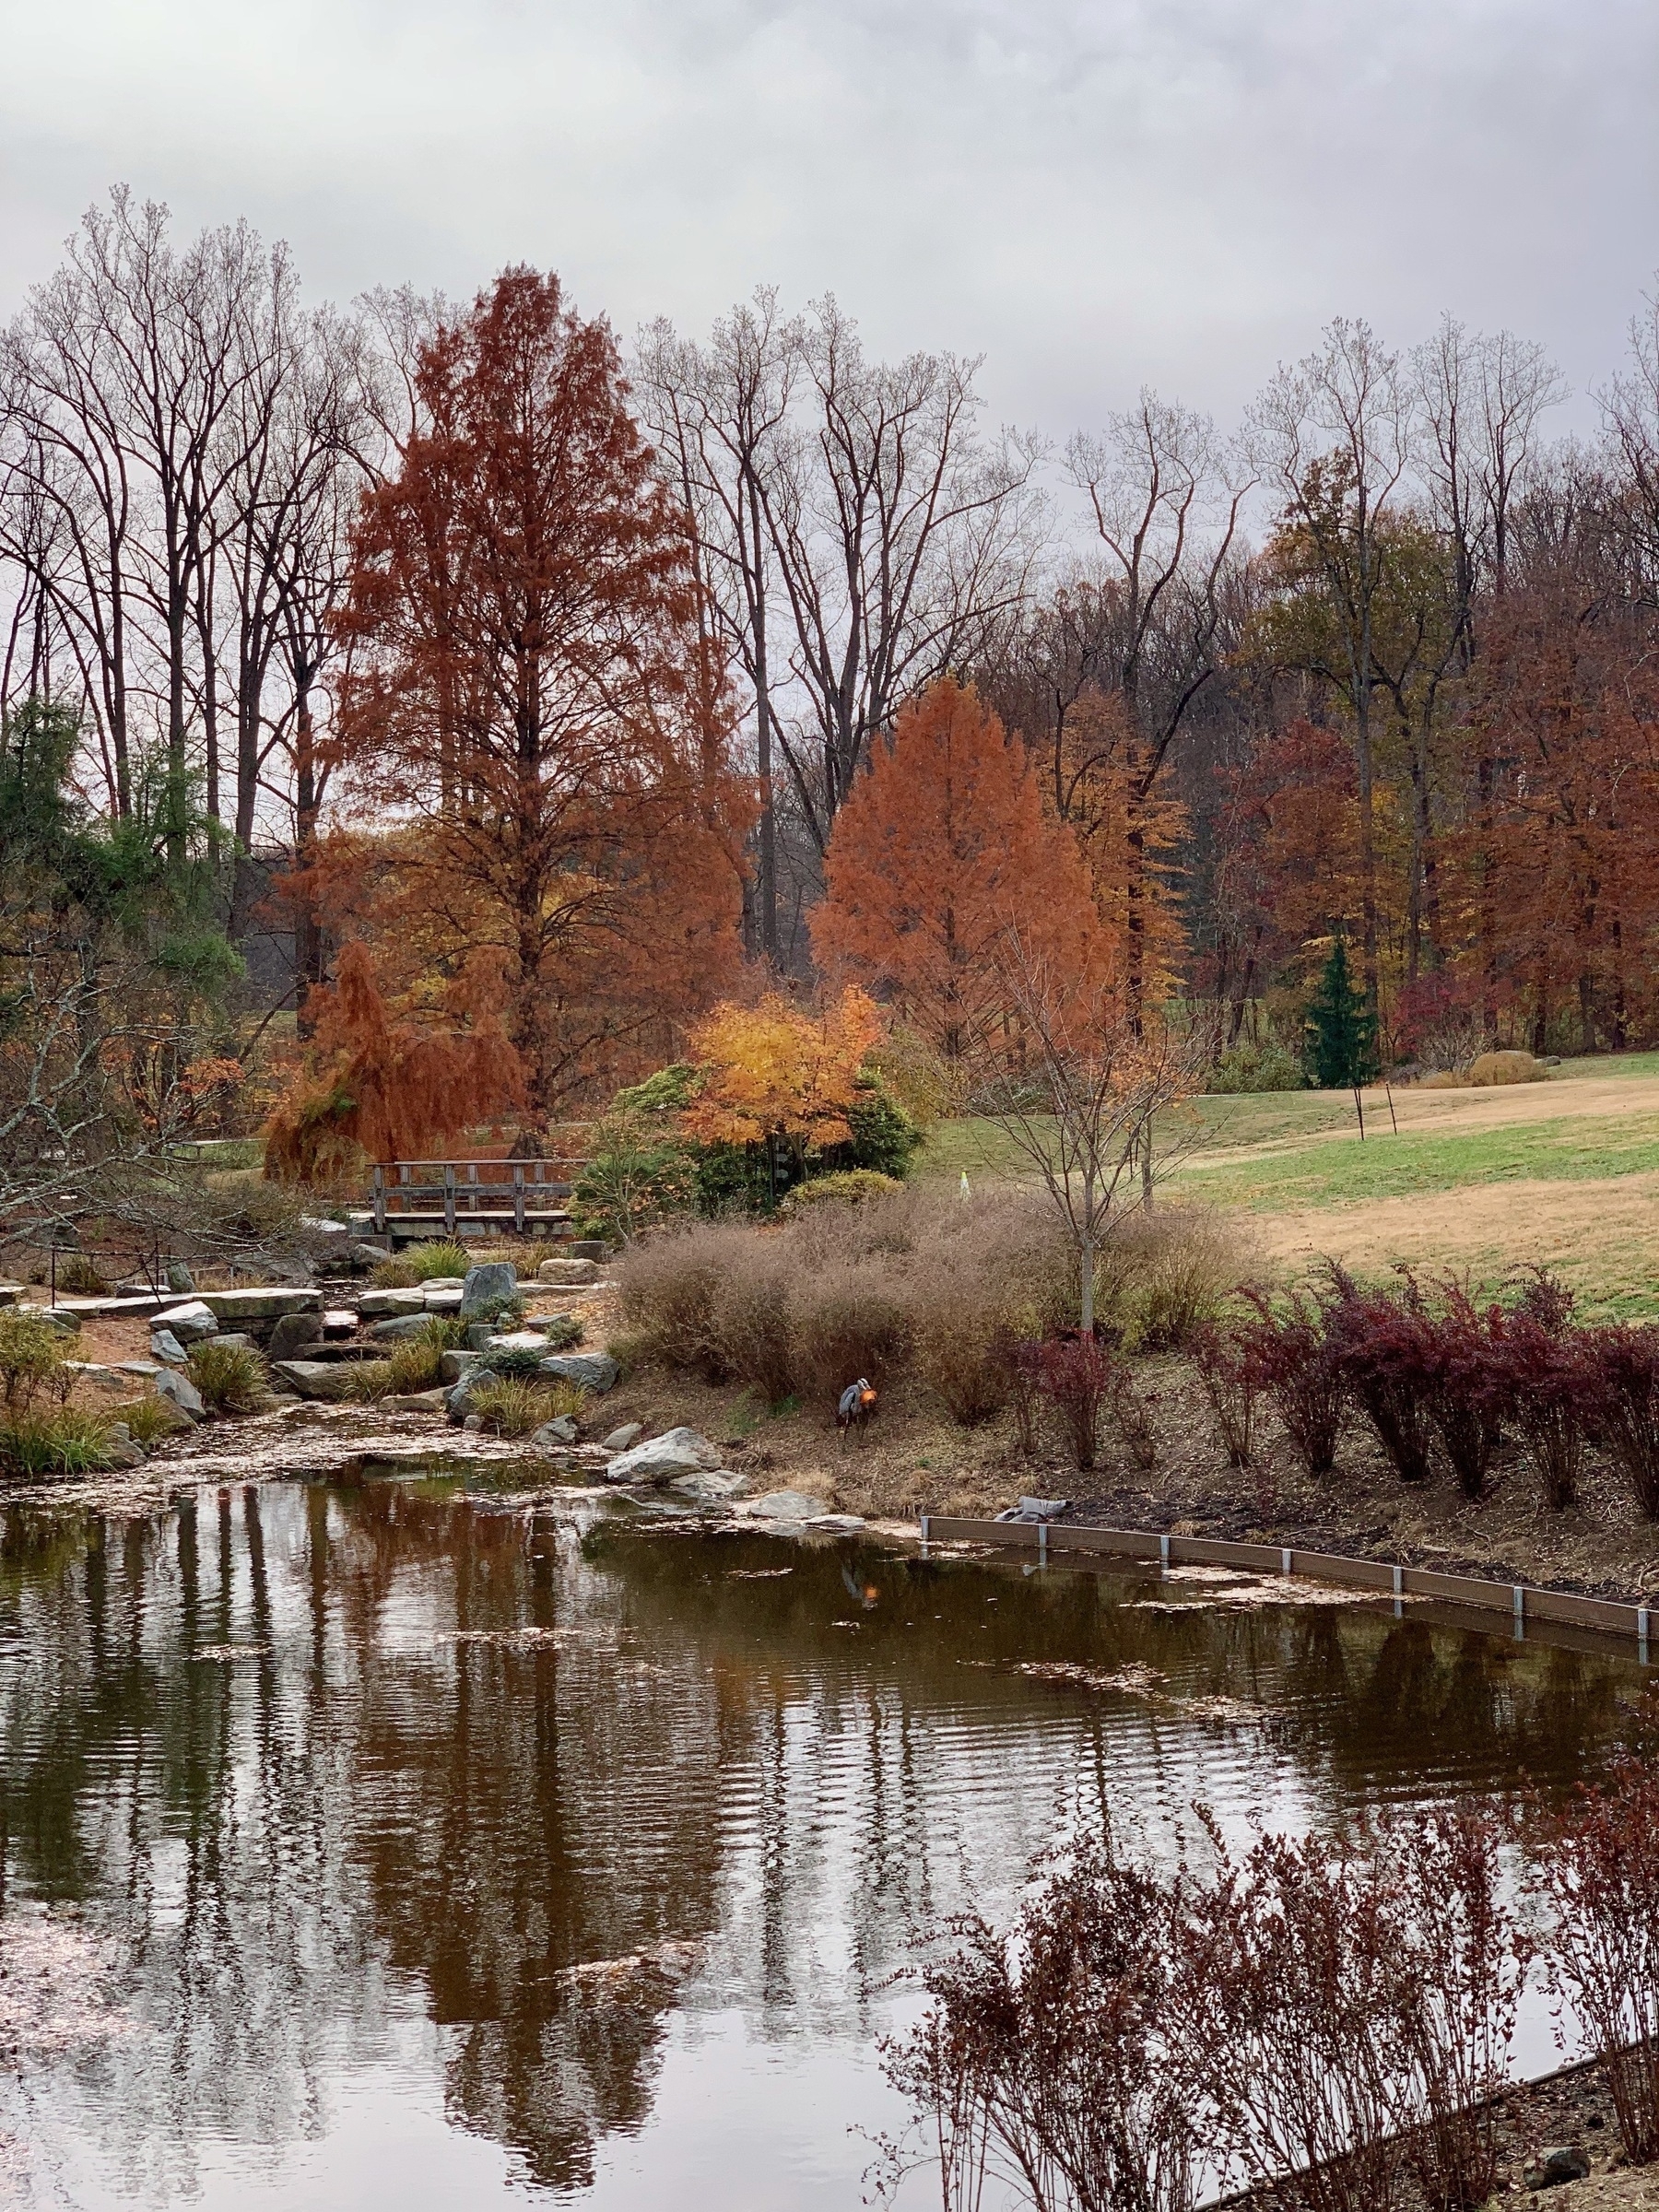 A rippled pond mirrors a fall landscape on a gloomy, overcast day. A hunched figure at the center holds something bright orange in its beak.